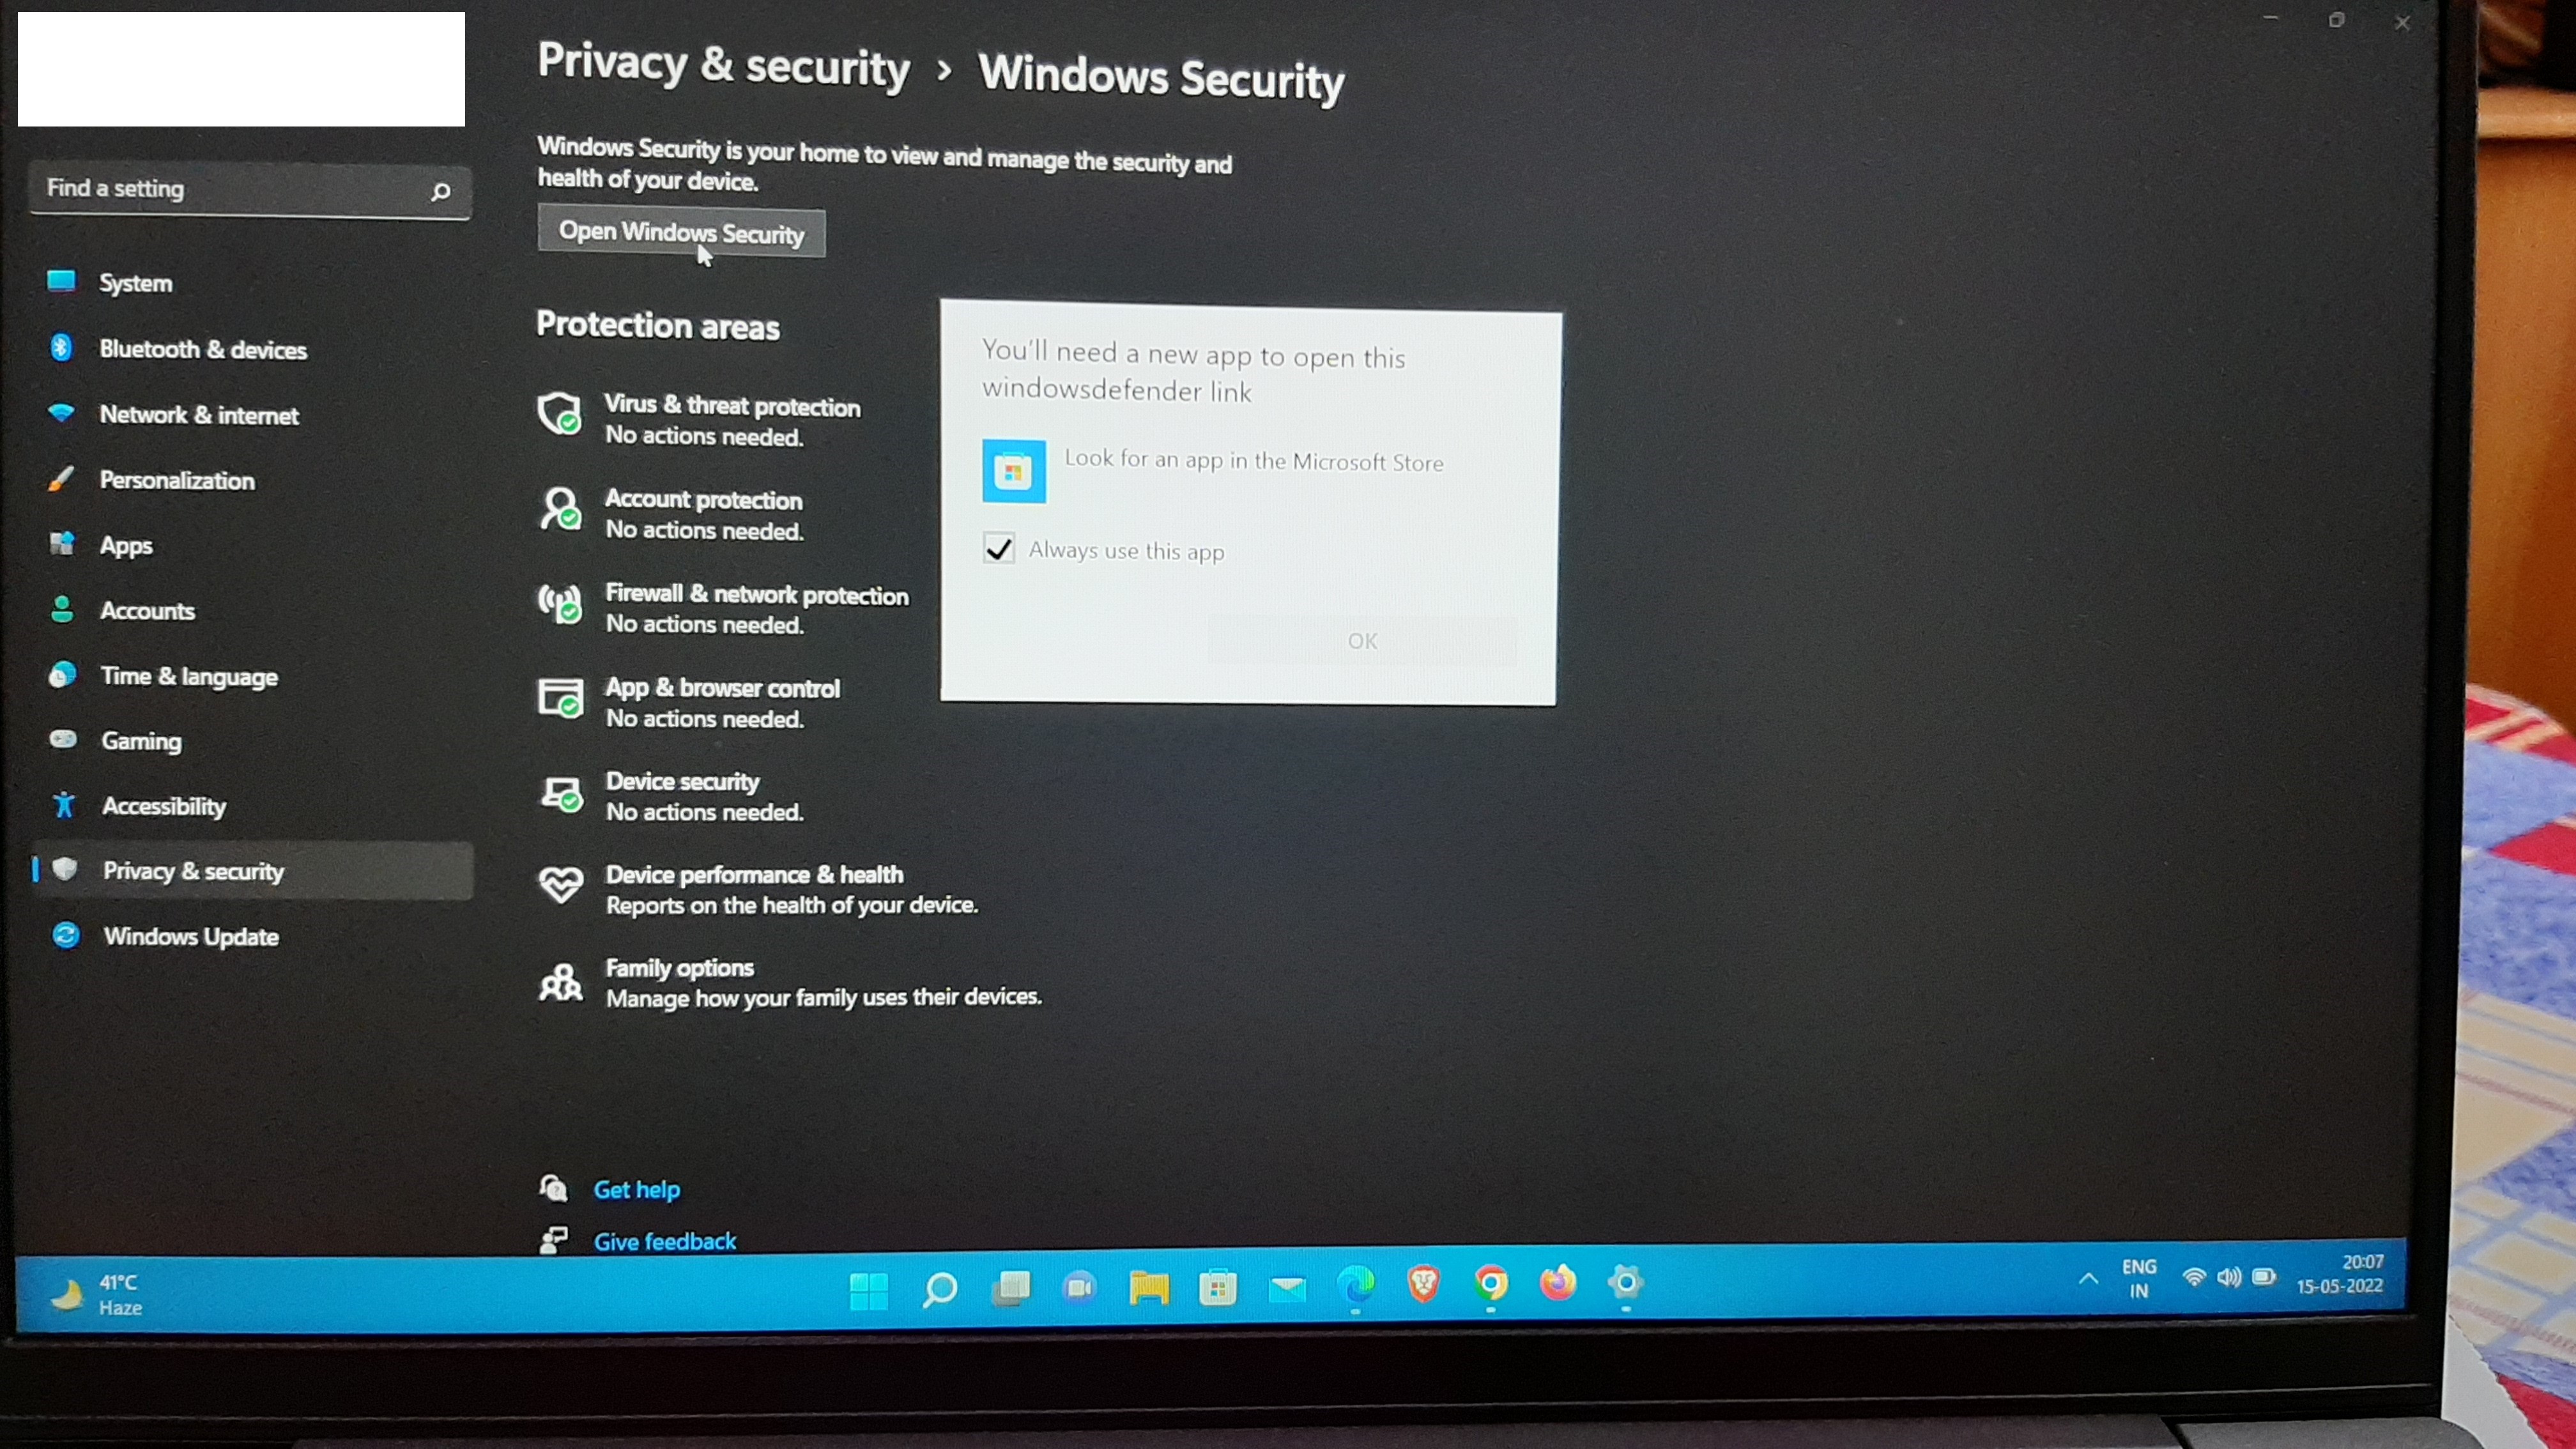 Can't access my windows defender link in windows 11 - Microsoft Community